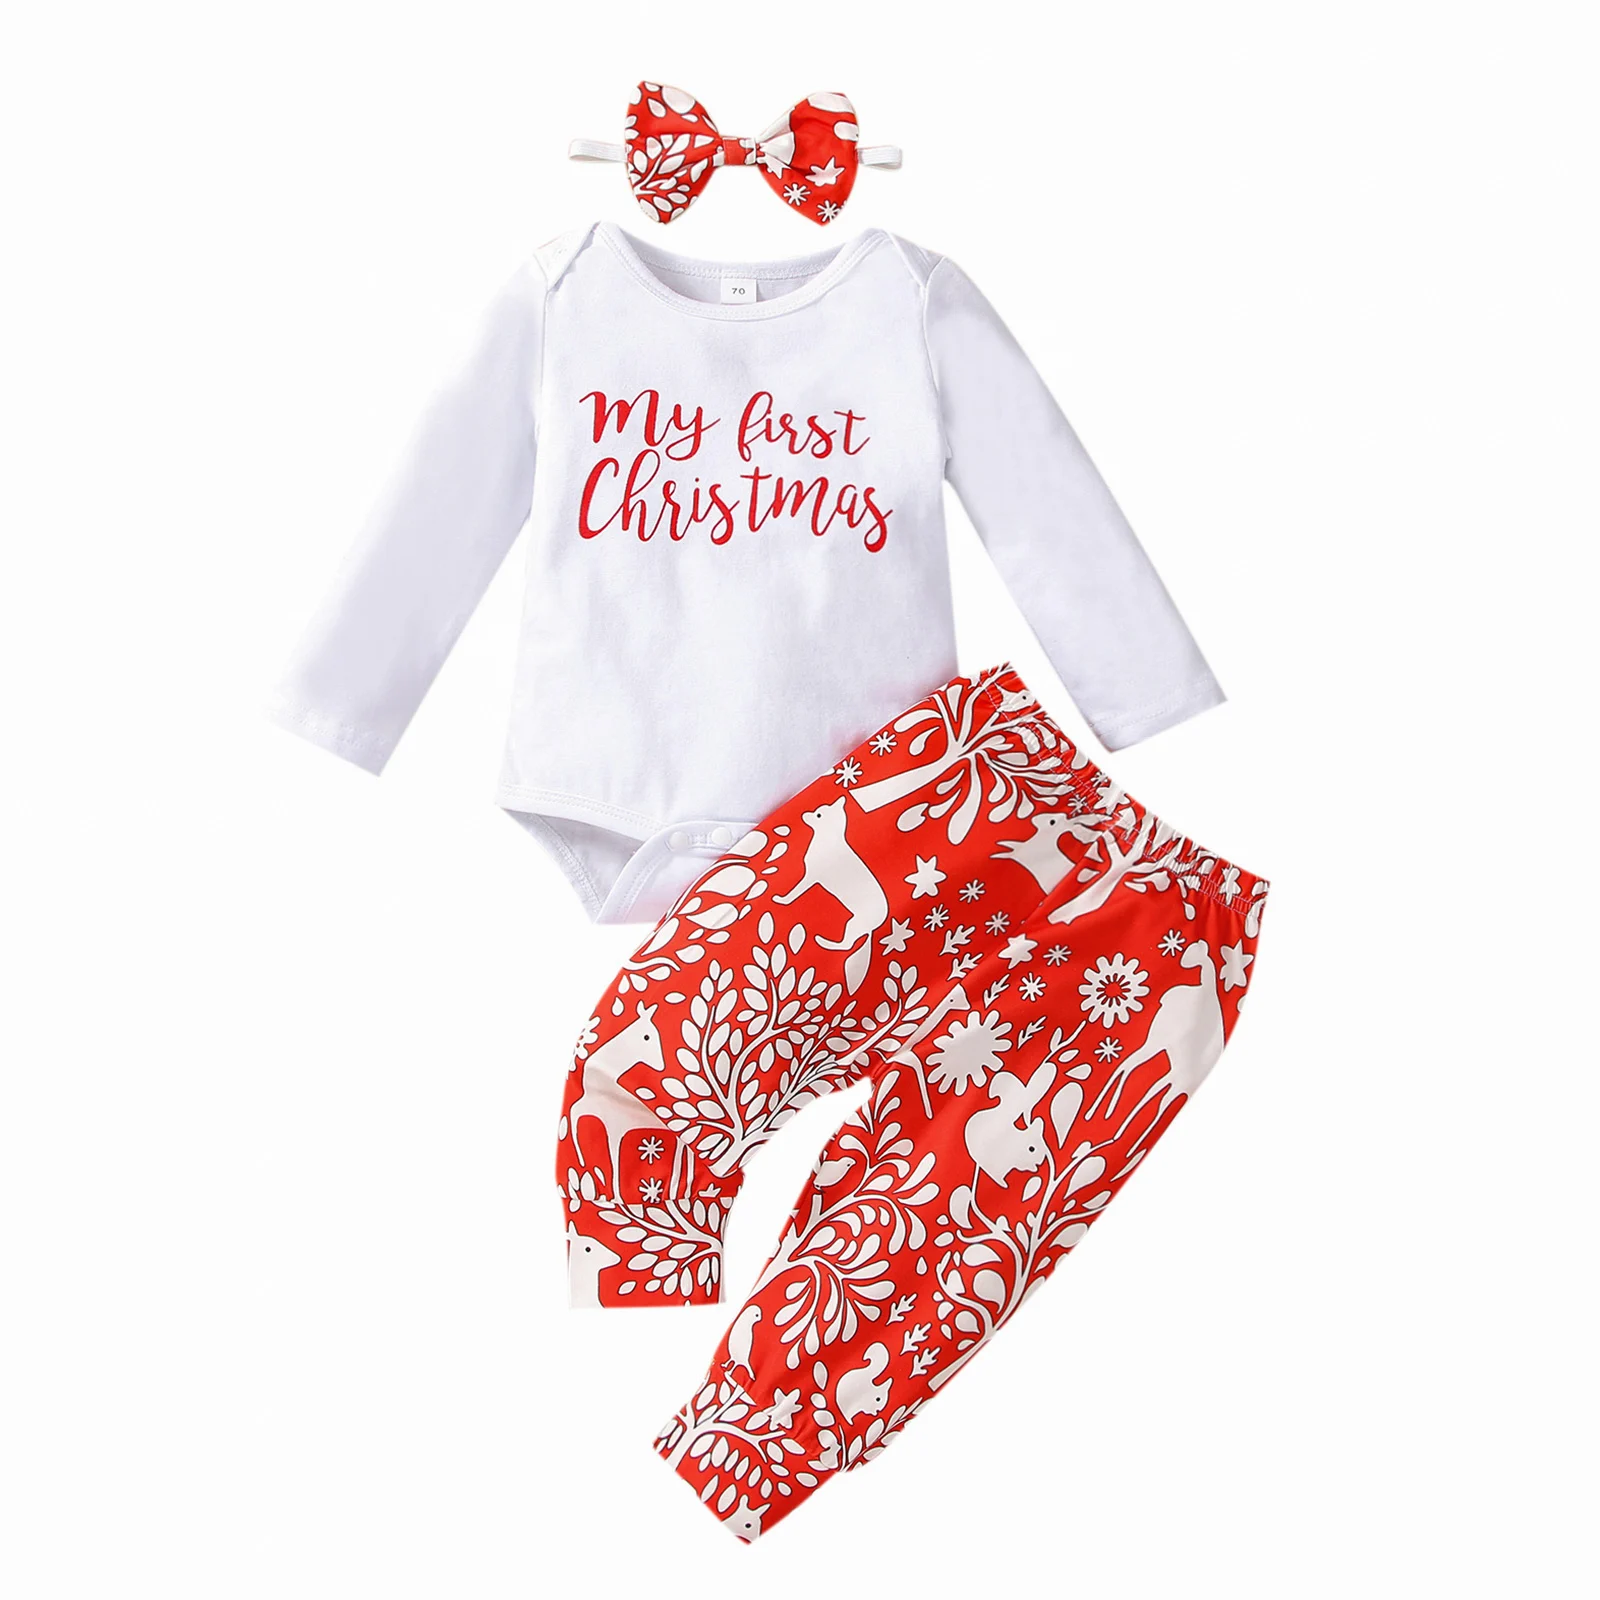 

OPPERIAYA 3Pc My First Christmas Outfit Letter Long-Sleeve Bodysuit Cartoon Pants Headband for Toddler Baby Girl Boy 0-18 Months